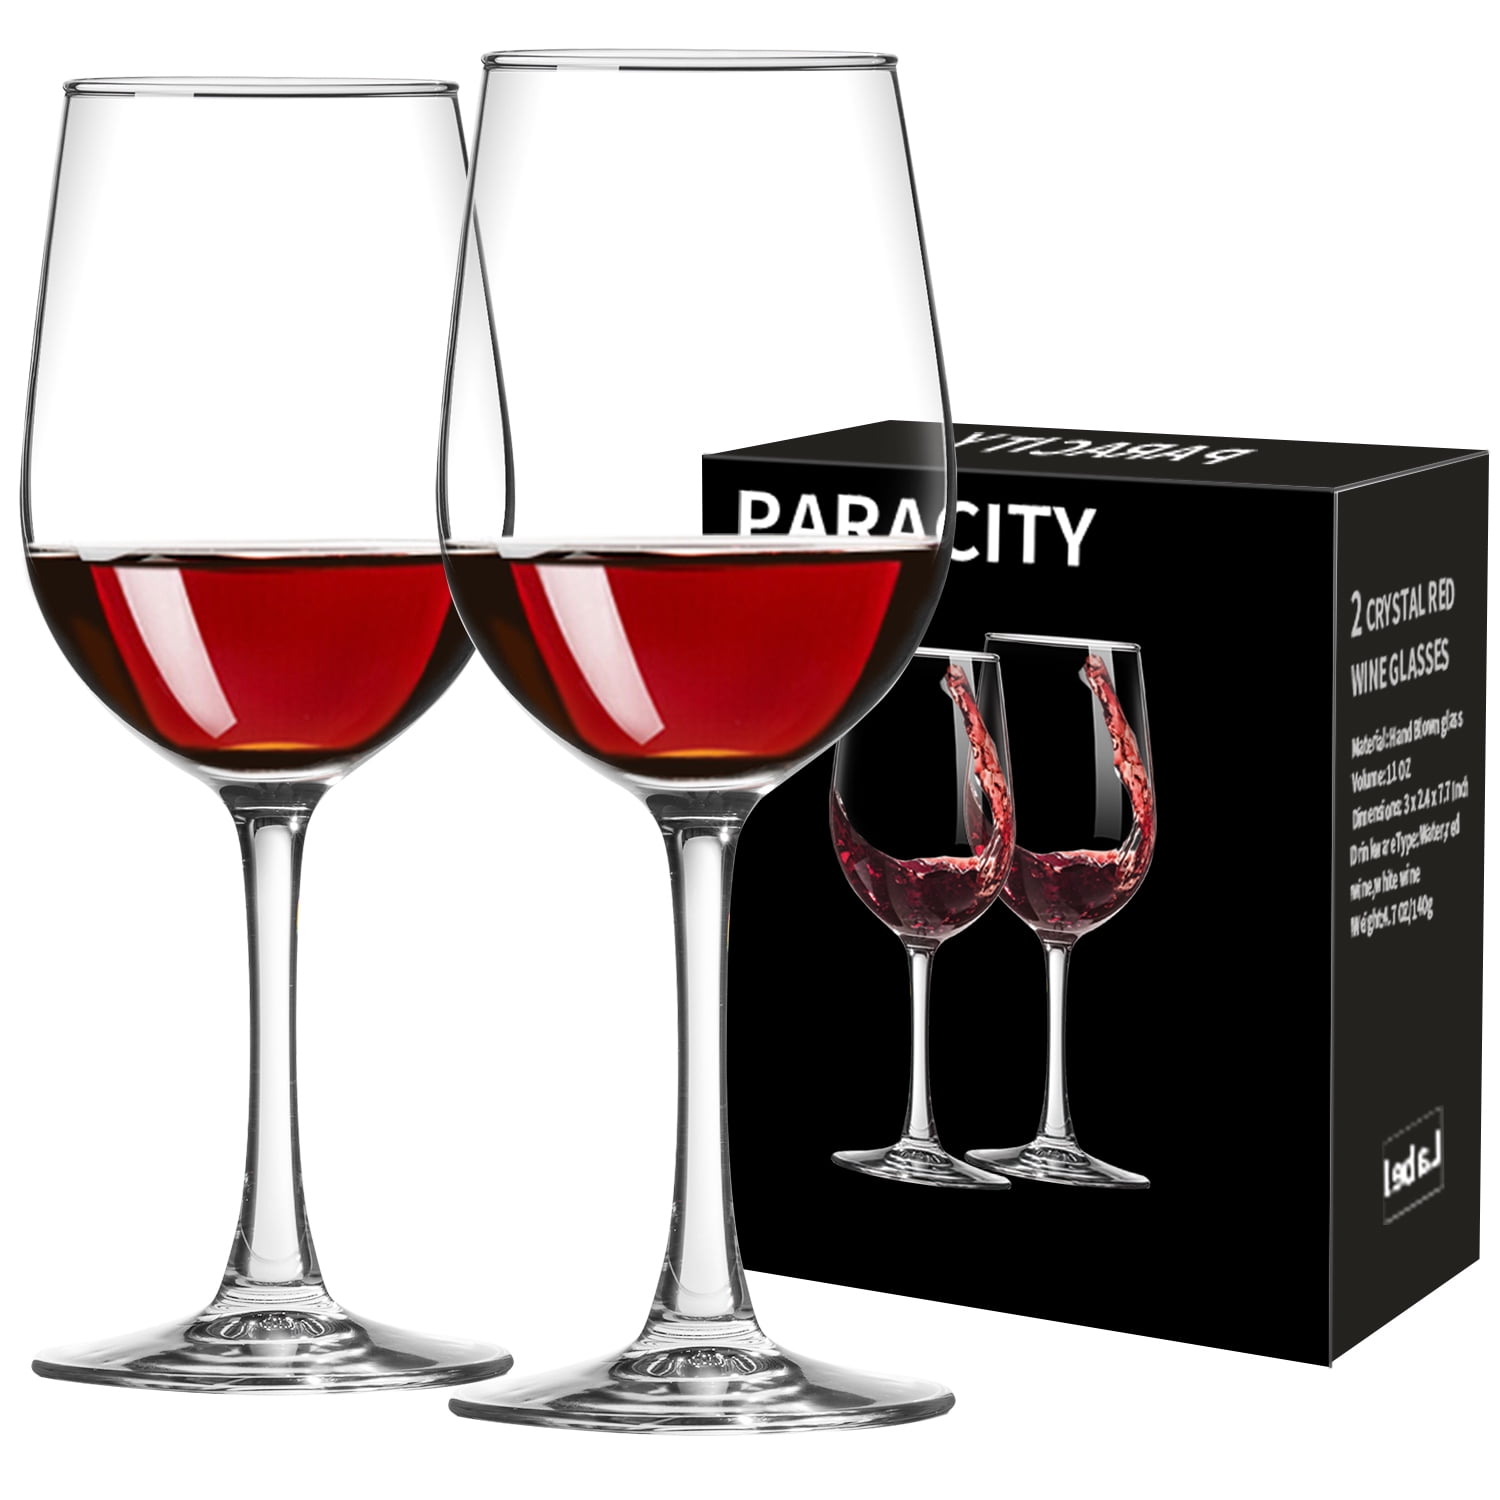 Vermont Red Wine Glasses - Set of 2 at M.LaHart & Co.